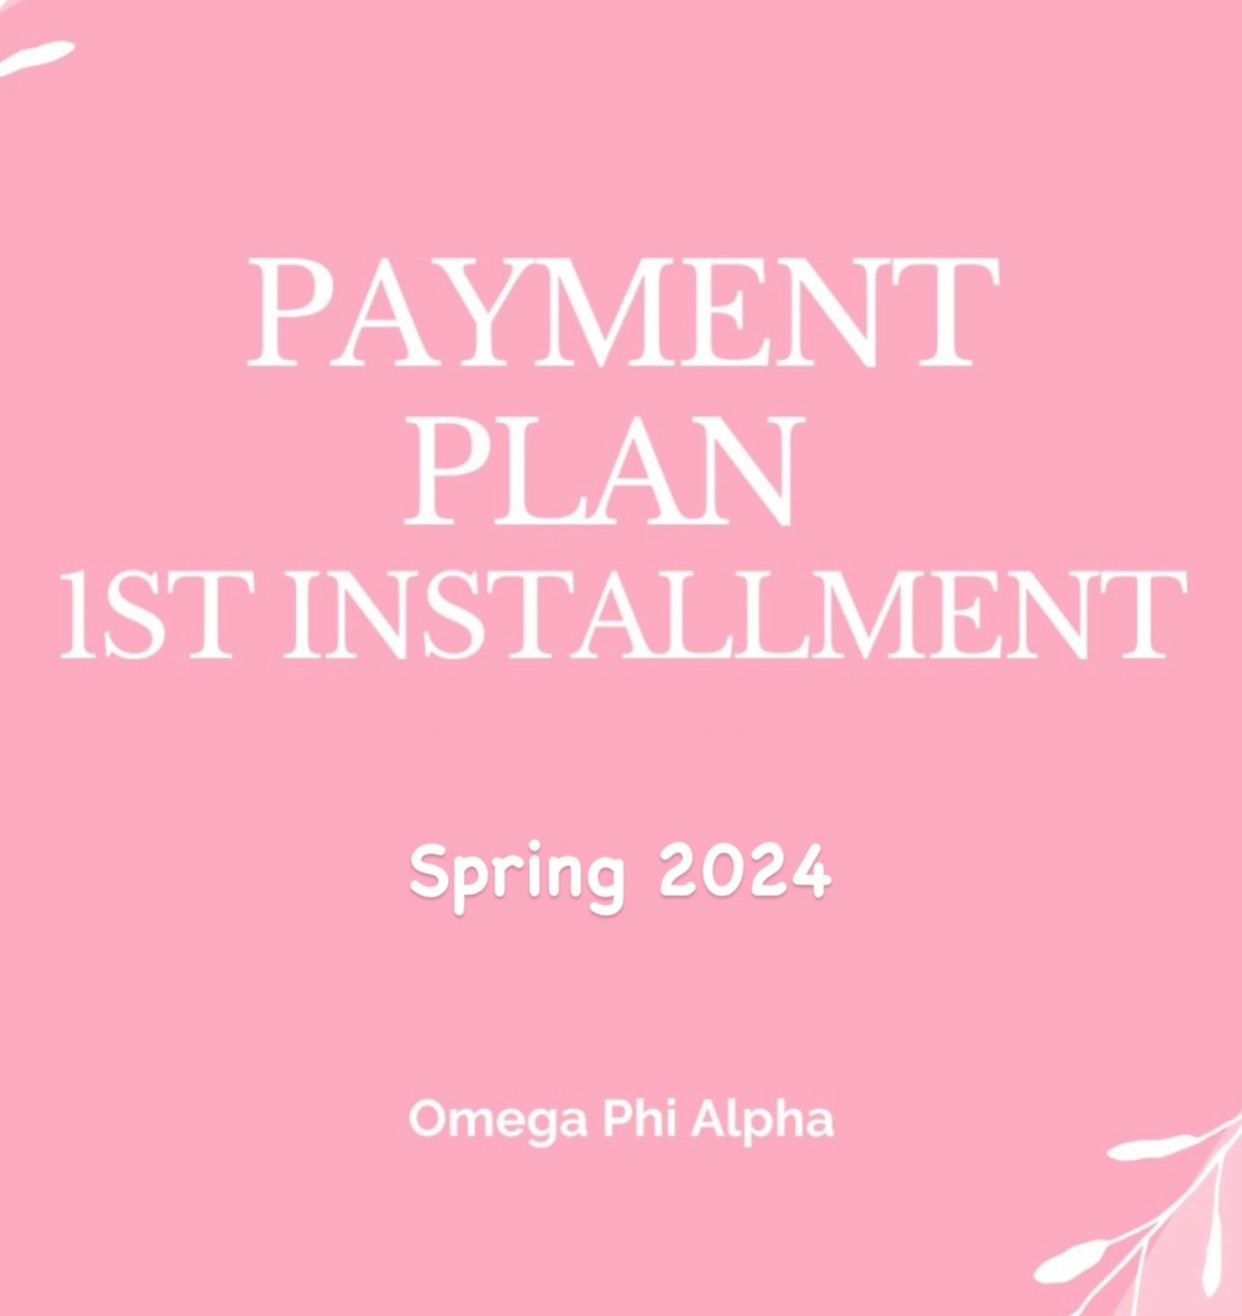 Chapter Dues Spring 2024 1st Installment